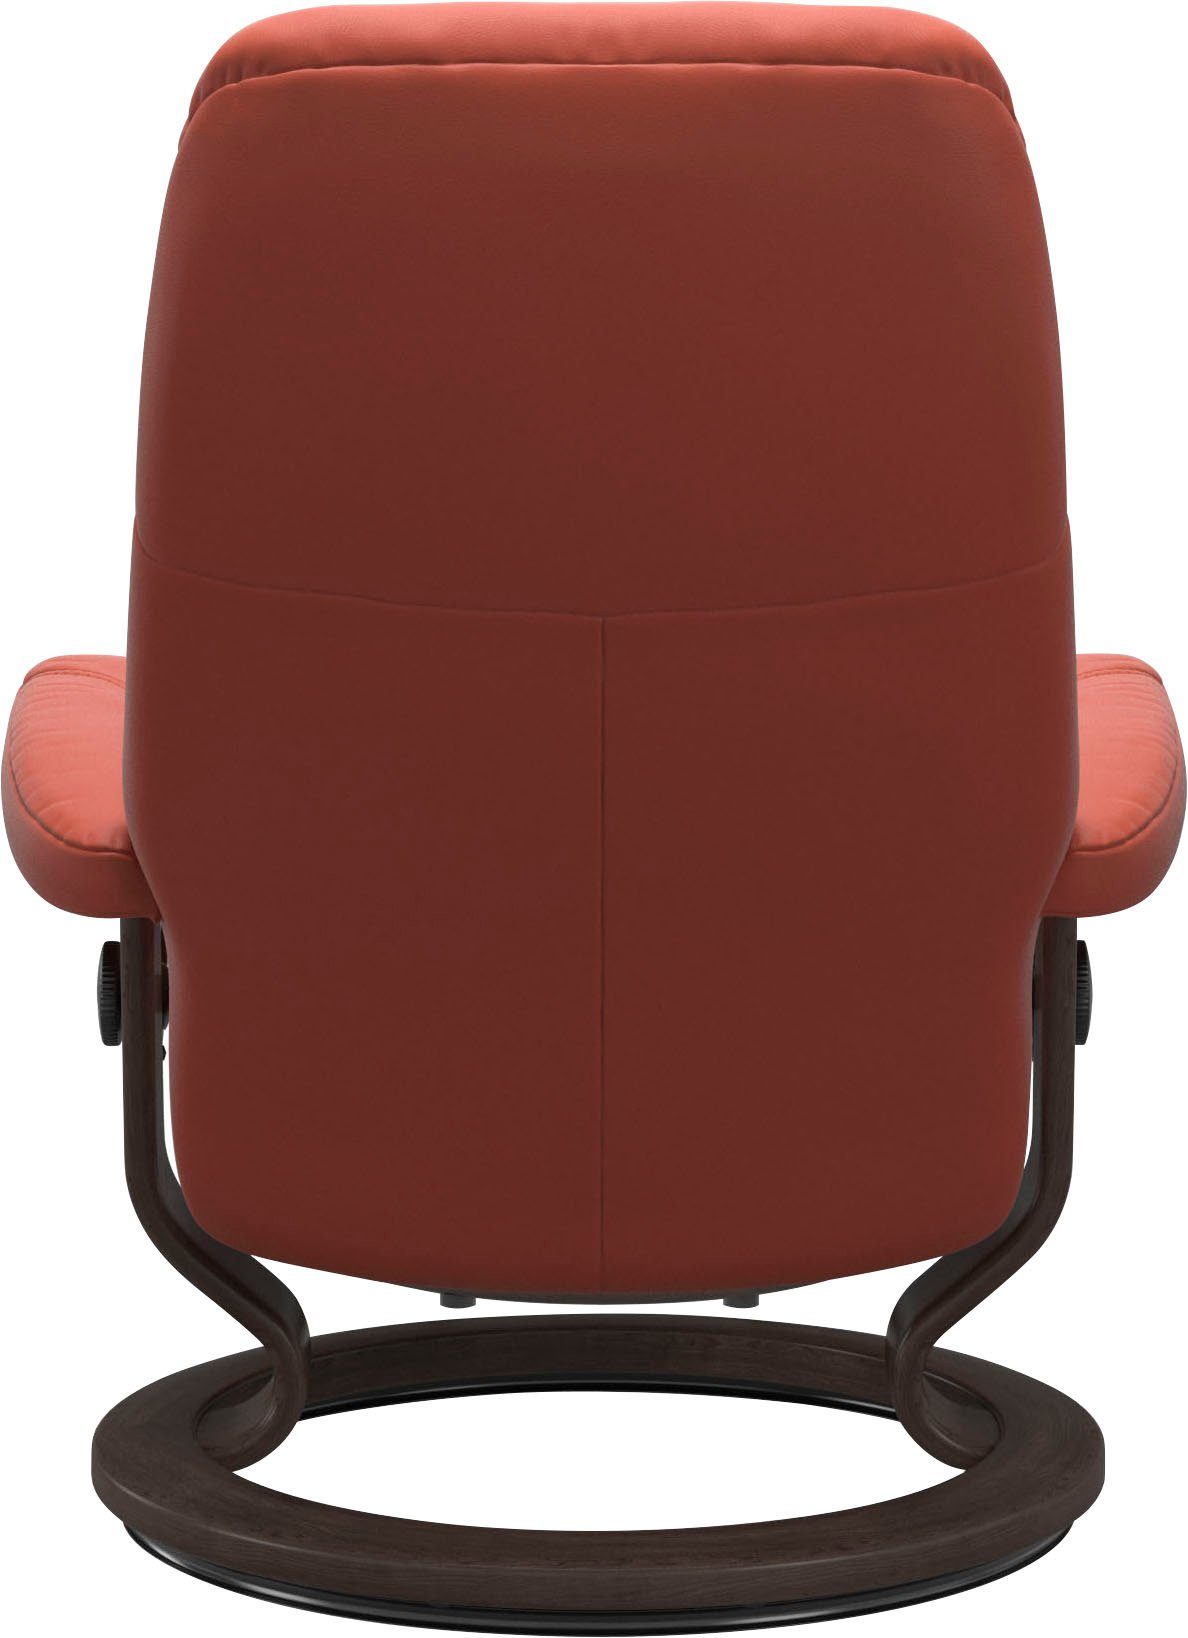 Stressless® Relaxsessel Consul, mit Classic Gestell Wenge Base, S, Größe